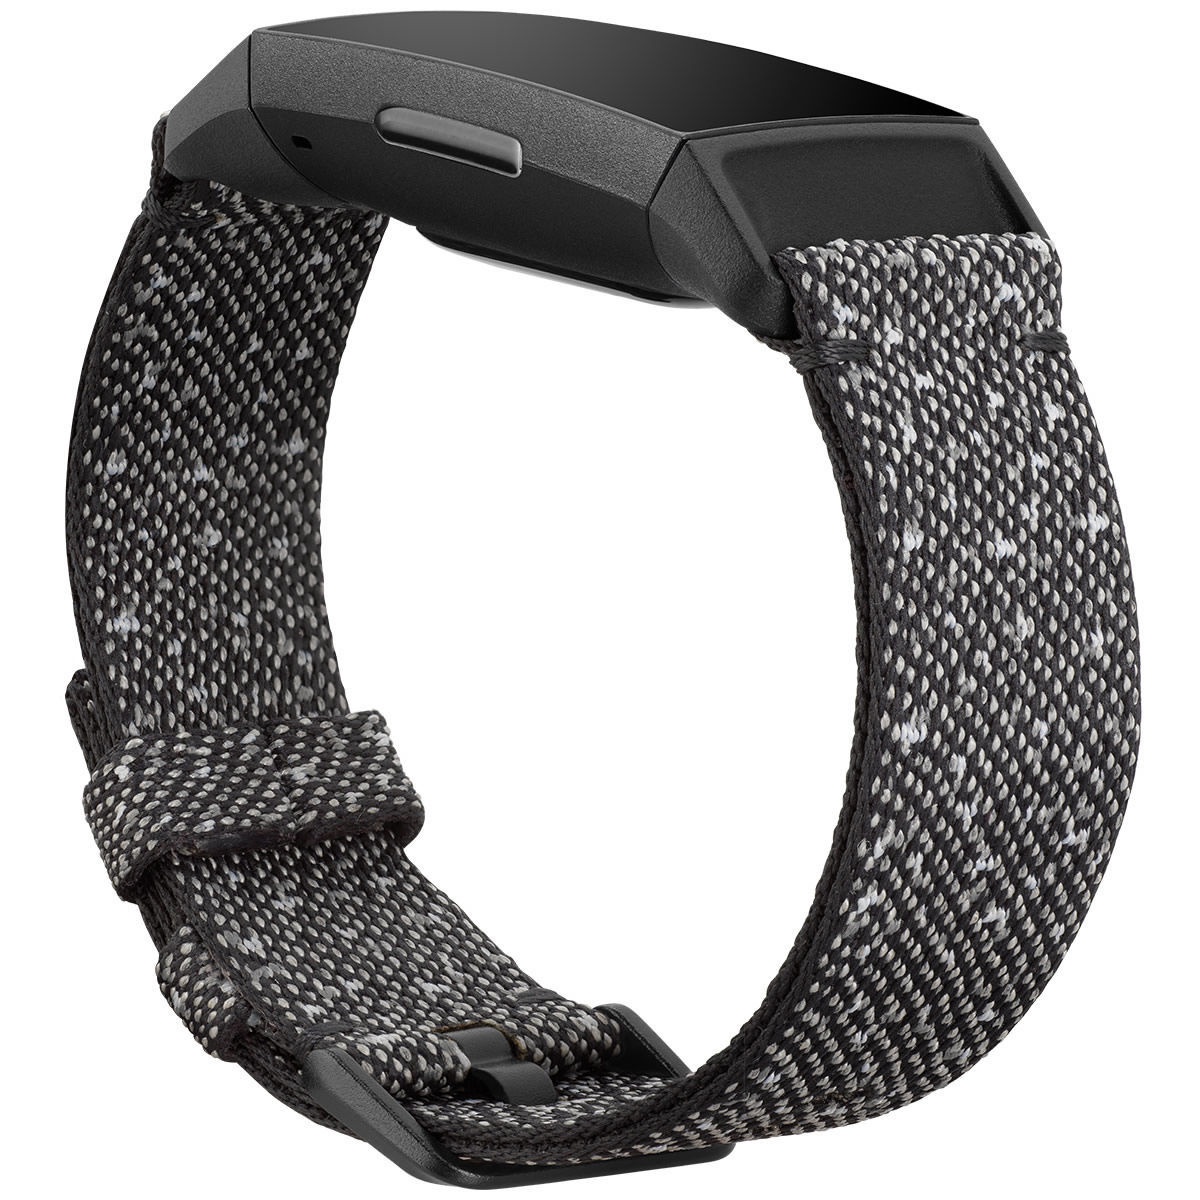 fitbit charge 4 pret